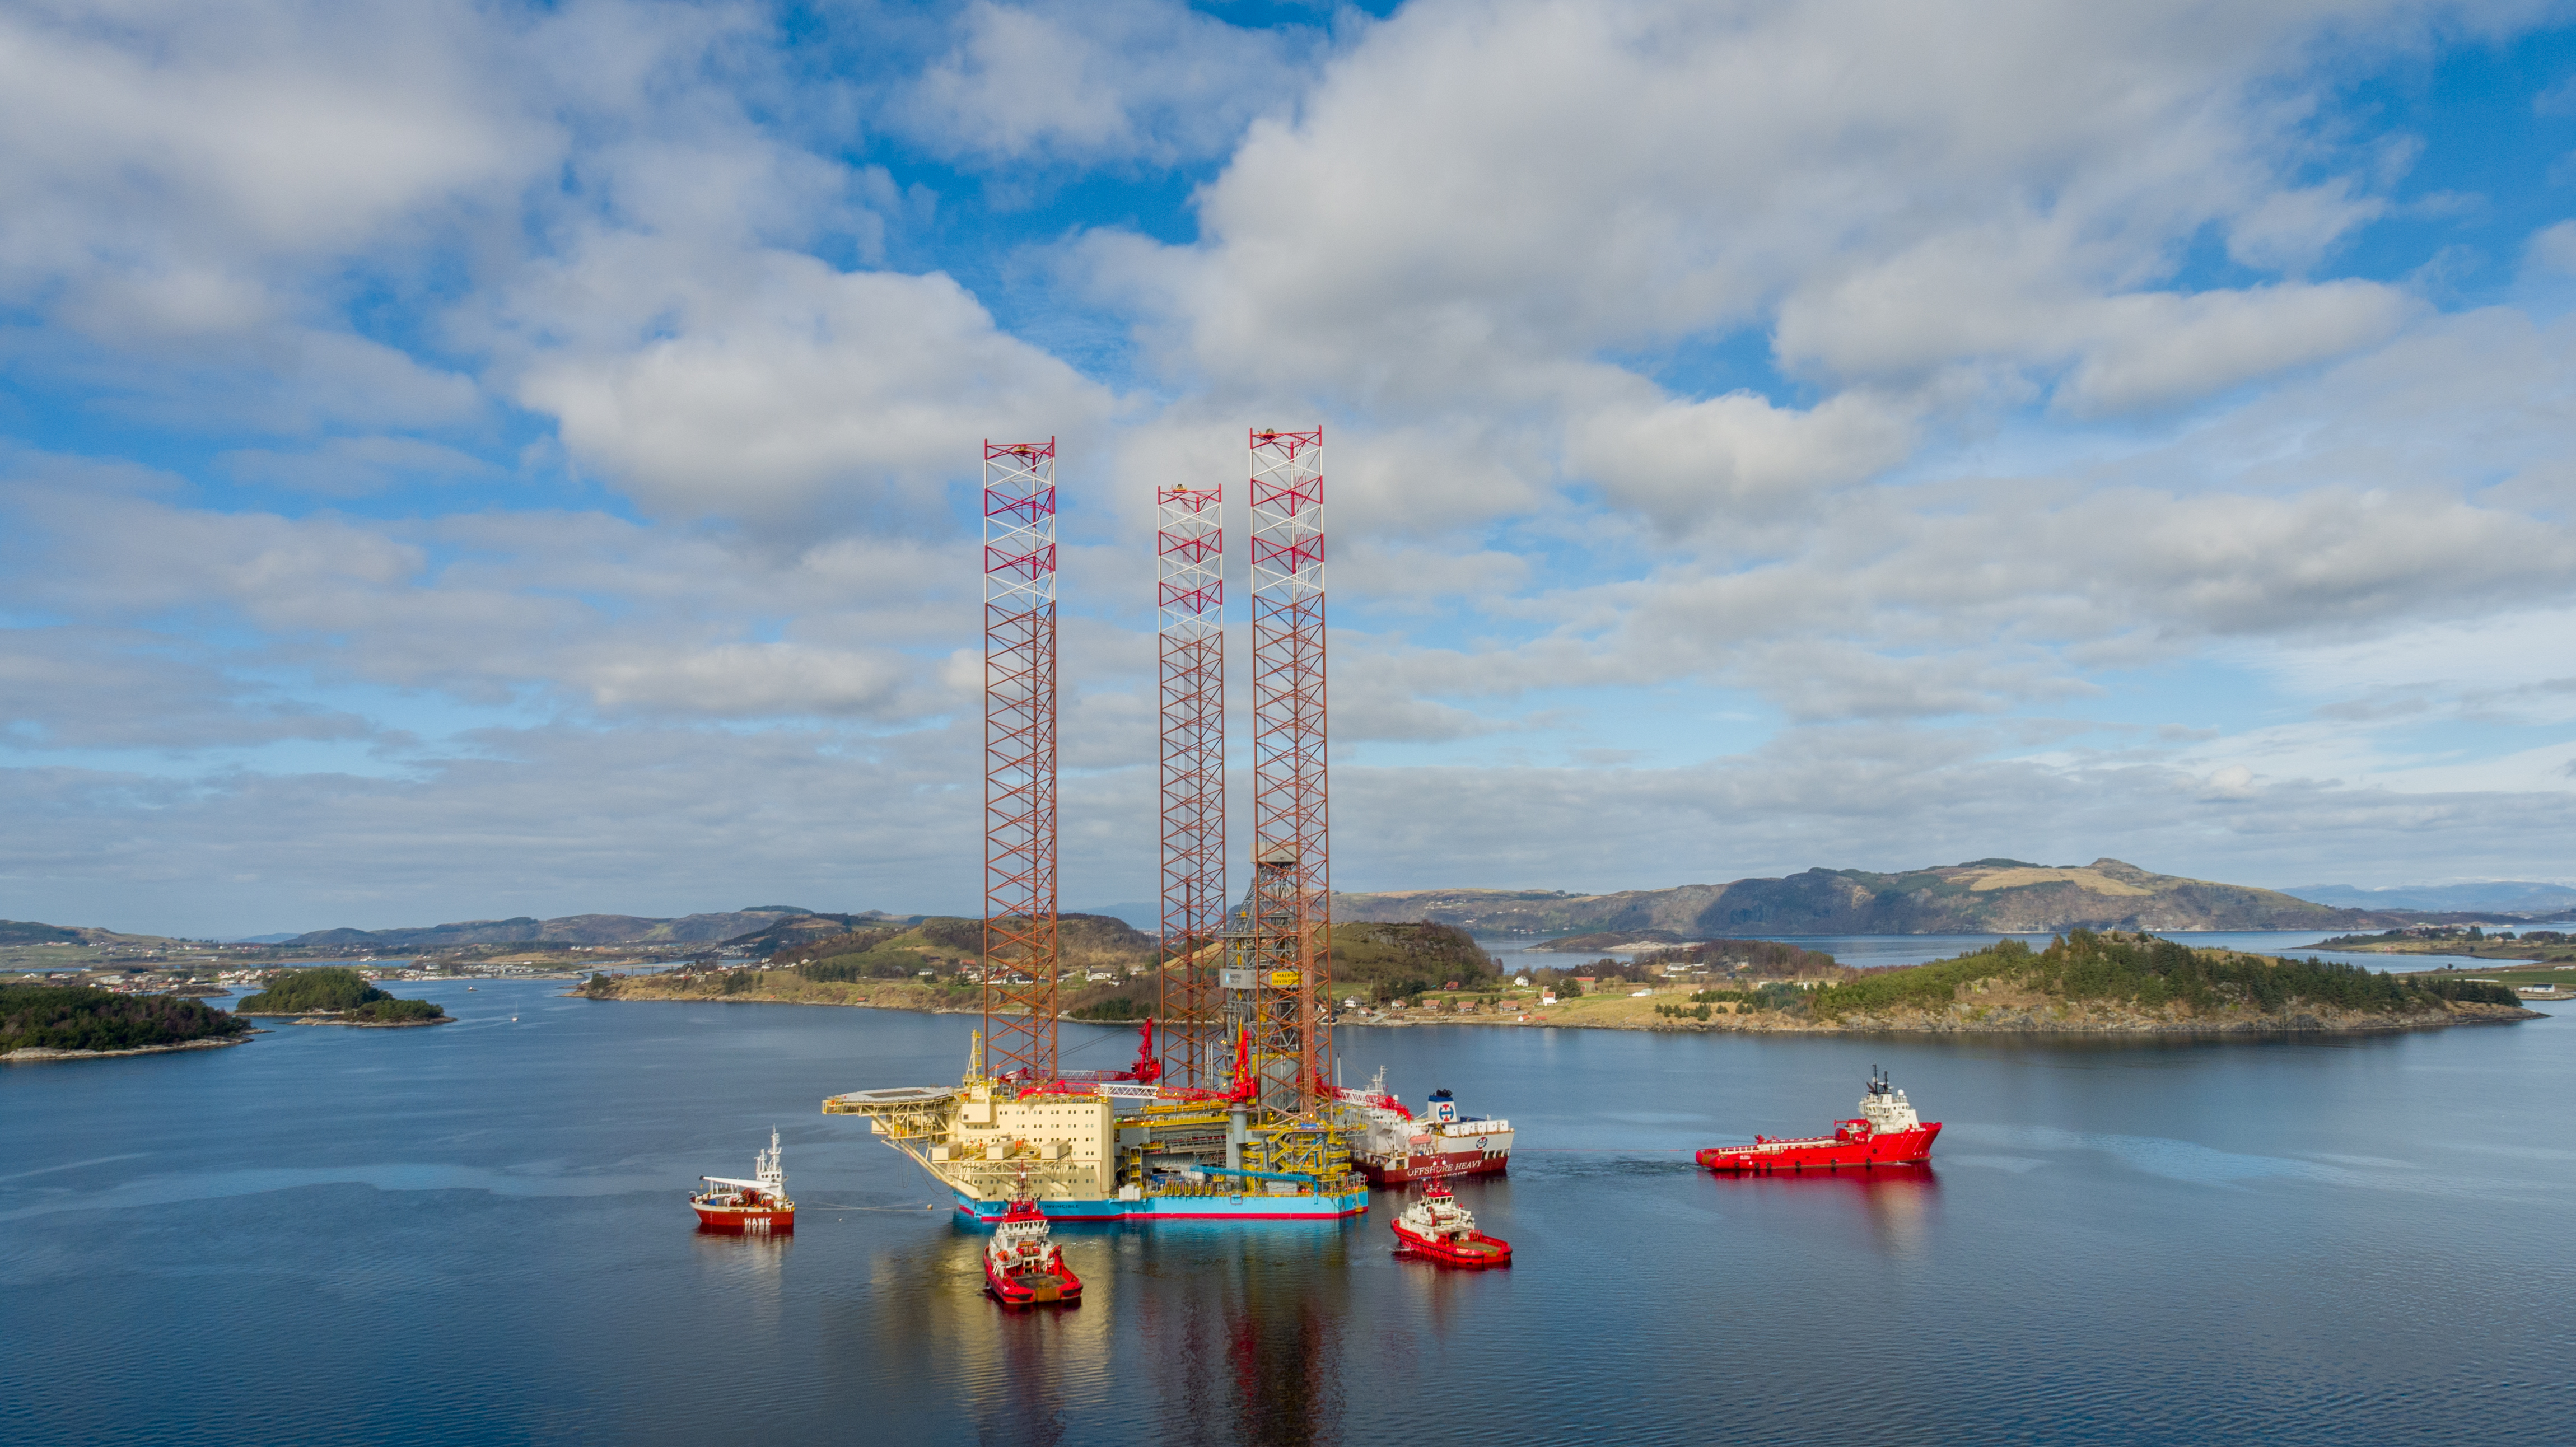 The Maersk Invincible drilling rig